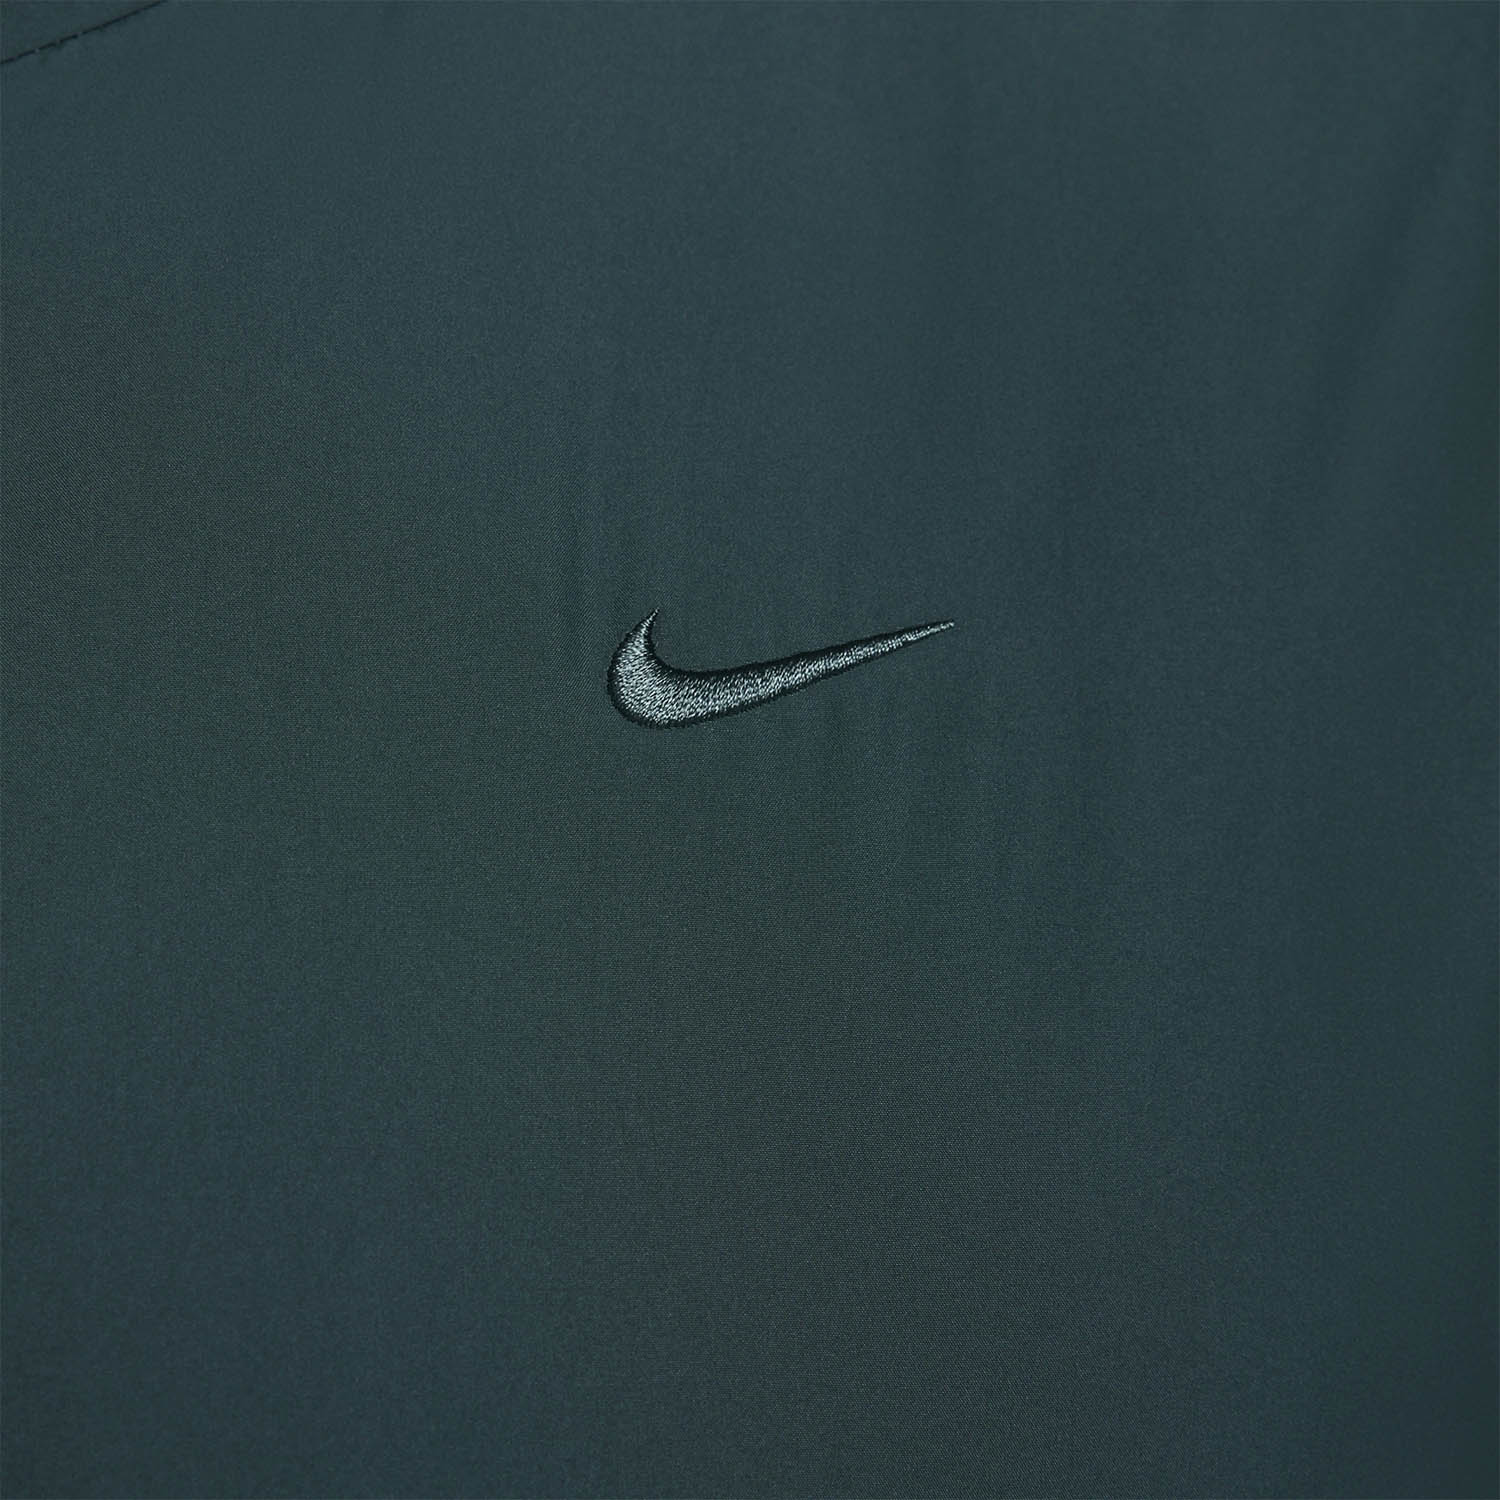 Nike Unlimited Therma-FIT Chaqueta - Deep Jungle